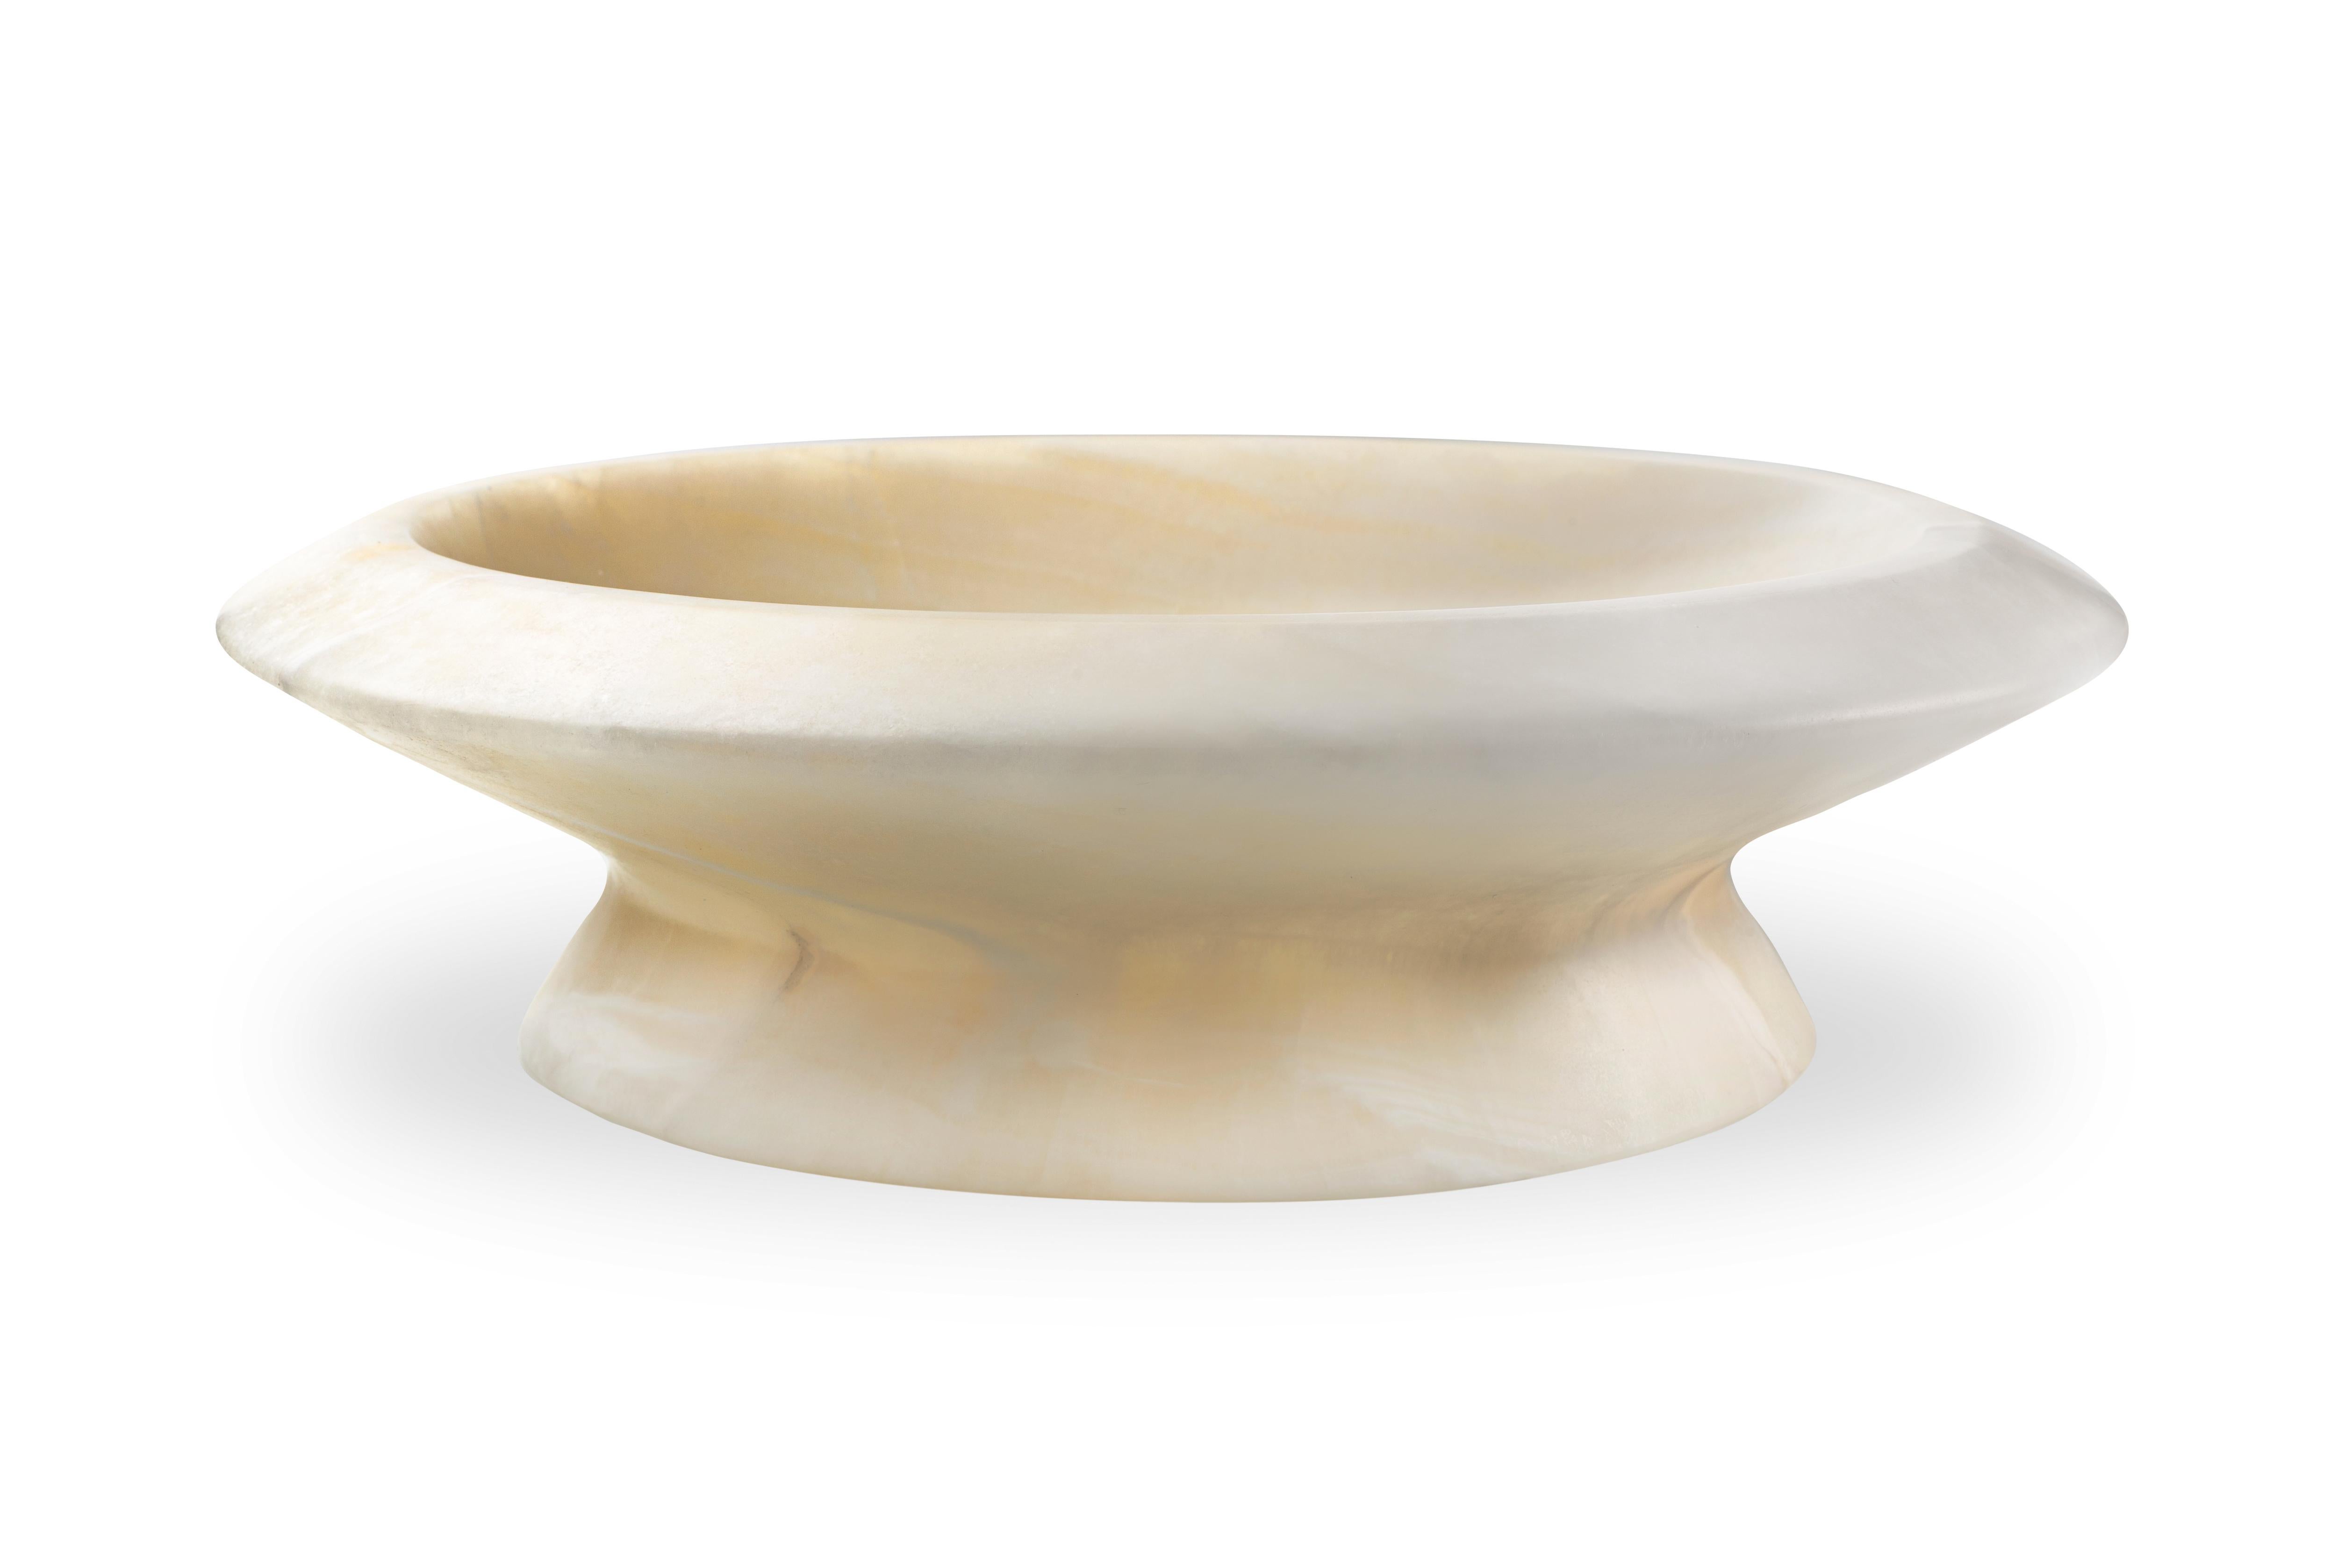 White onyx Amaltea by Ivan Colominas
Dimensions: 36.5 x 10 cm
Materials: Onice Bianco

Also Available: different marbles.

The collection is a tribute to one of Italy’s great masters of design and architecture: Angelo Mangiarotti, creator of